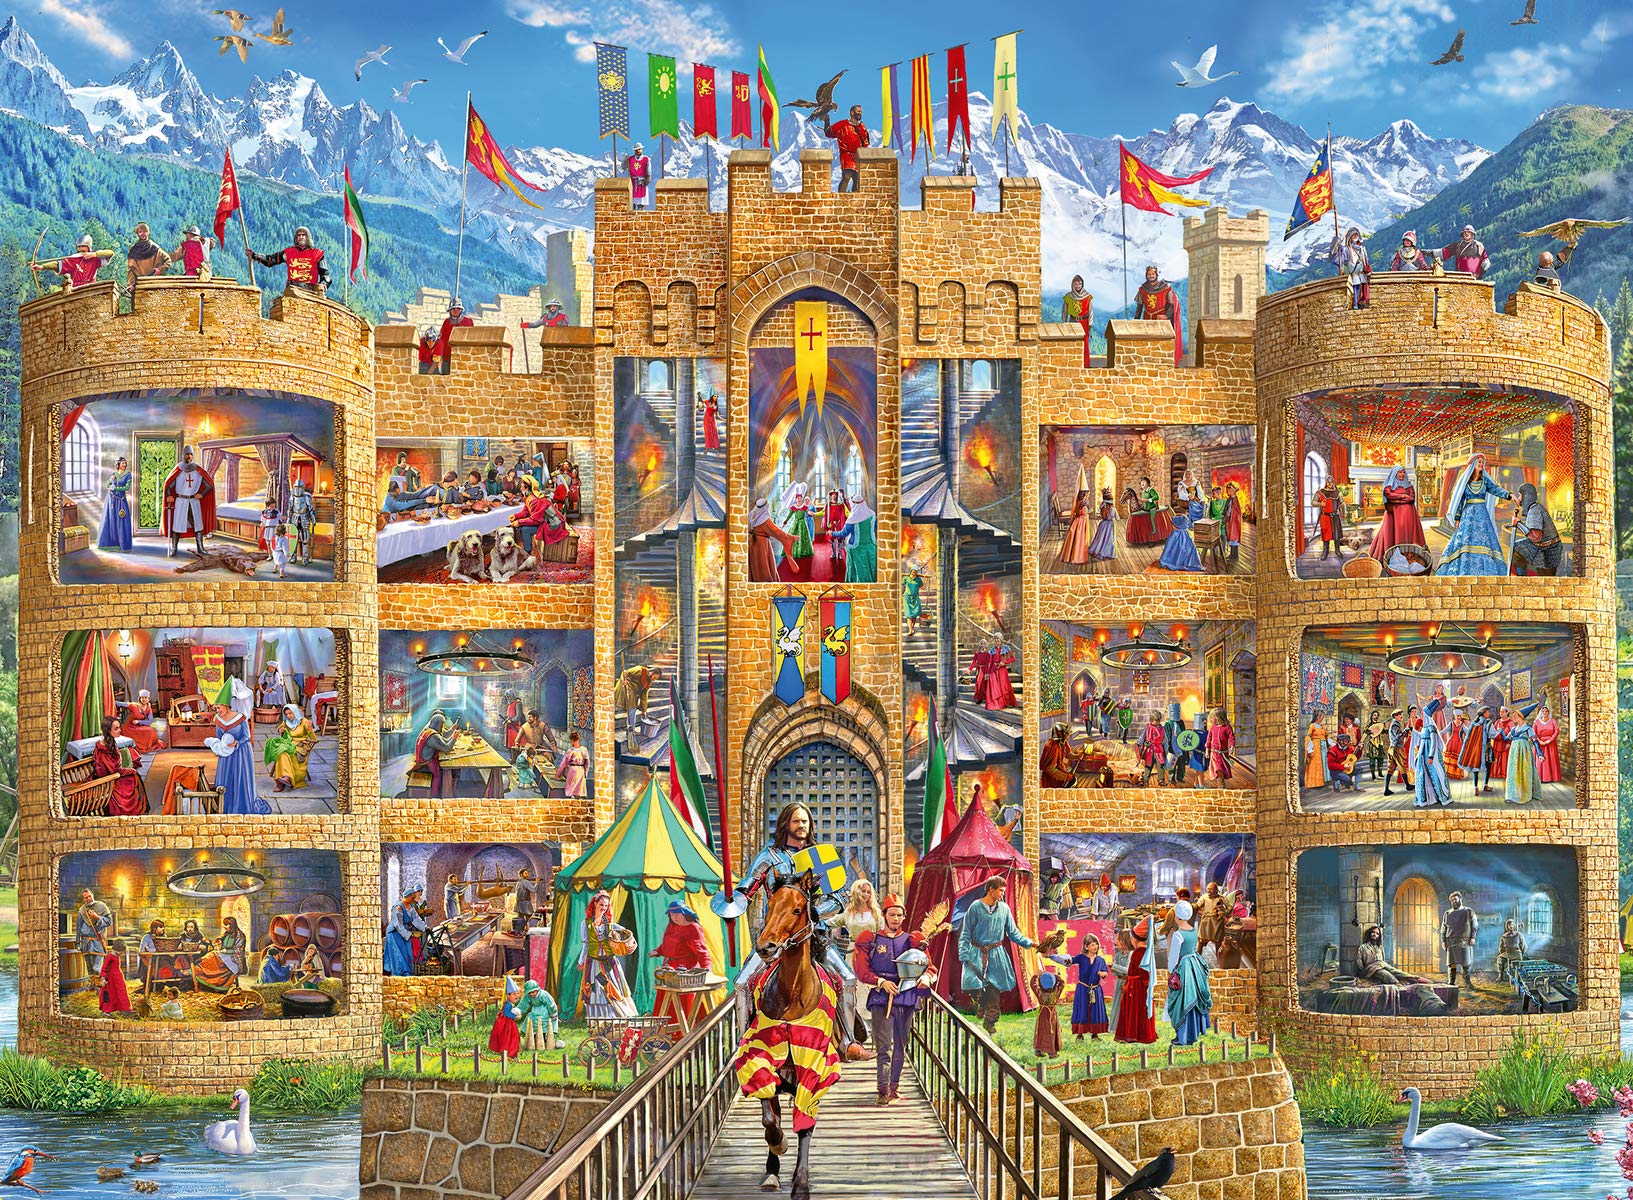 Ravensburger Castle Cutaway 150 Piece Jigsaw Puzzle for Kids - 12919 - Every Piece is Unique, Pieces Fit Together Perfectly